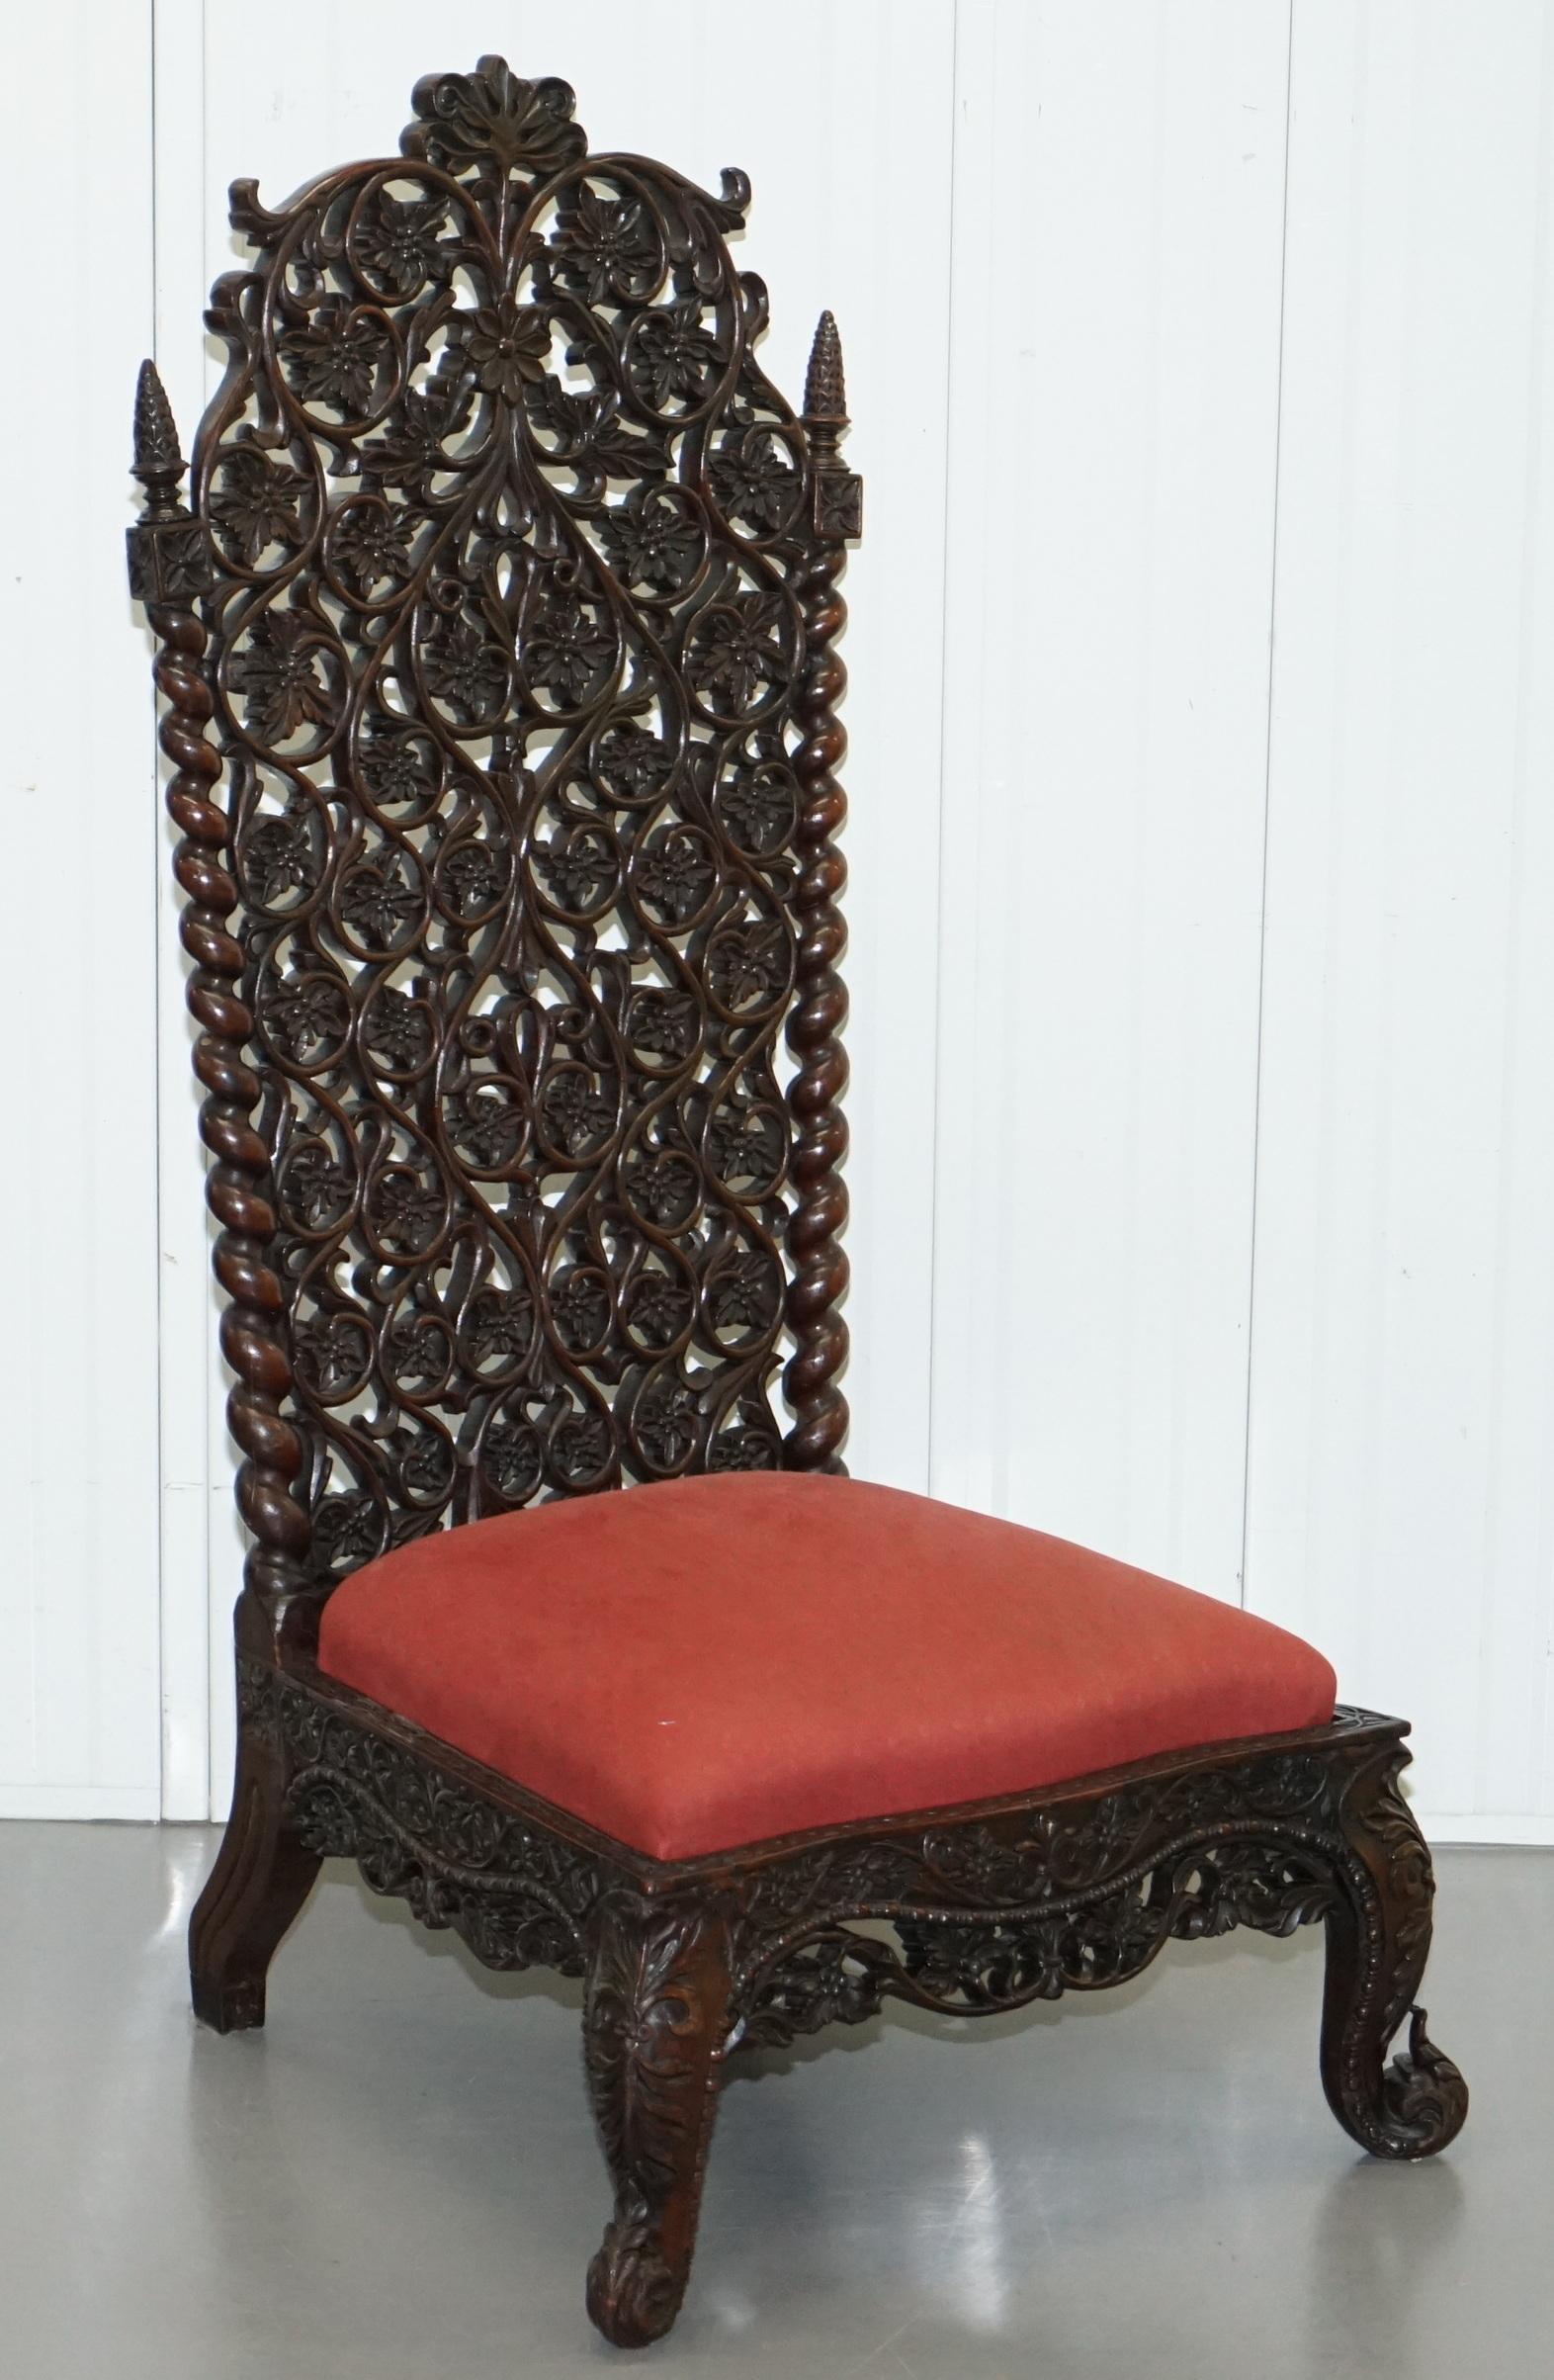 We are delighted to this absolutely stunning solid Rosewood hand carved high back low seat Burmese chair

A truly stunning piece, this type of furniture is just about as ornate as you will see anywhere in the world, intricately hand carved from